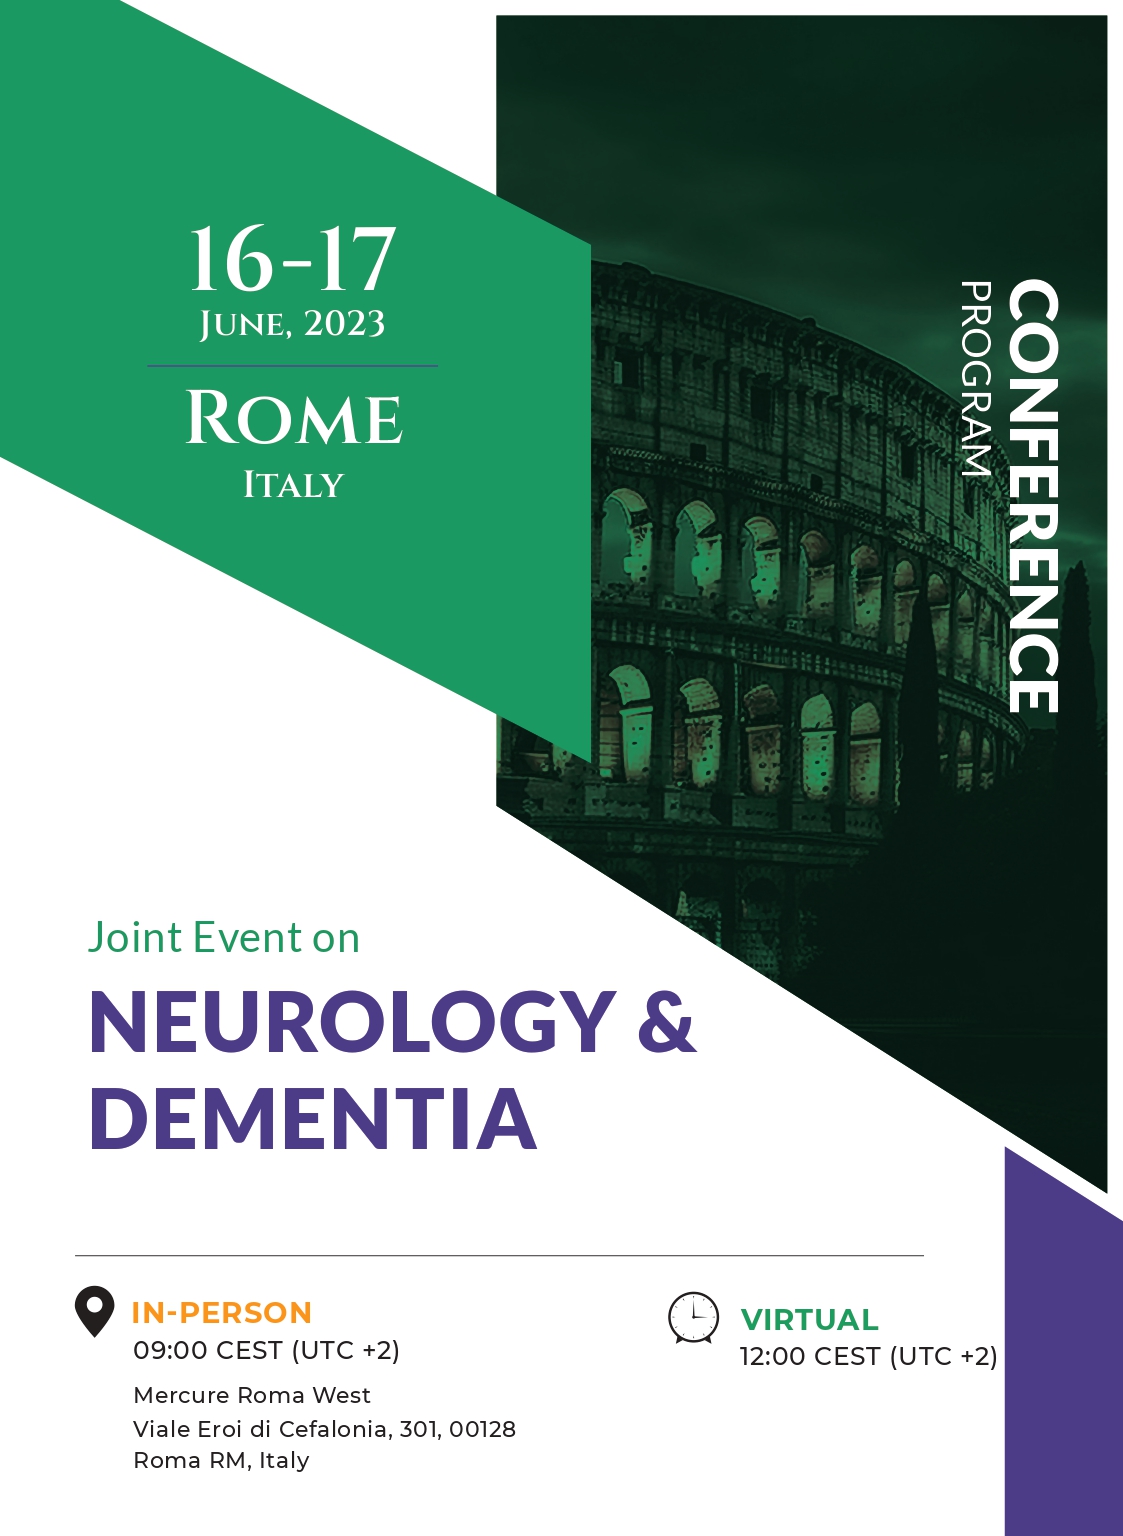 7th Edition of International Conference on Neurology and Neurological Disorders | Rome, Italy Program